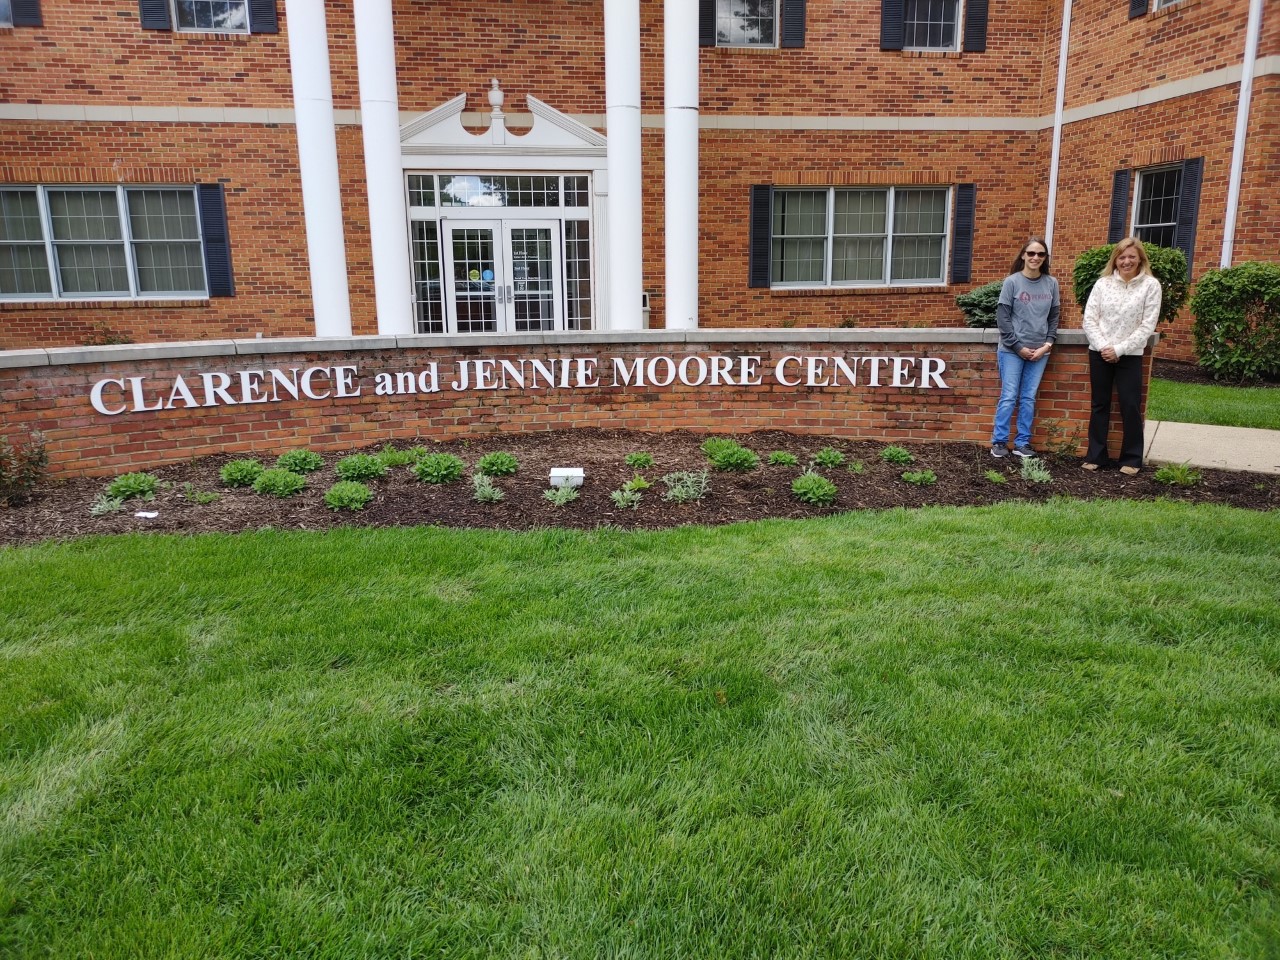 Two ladies standing in front of the Clarence and Jennie Moore Center